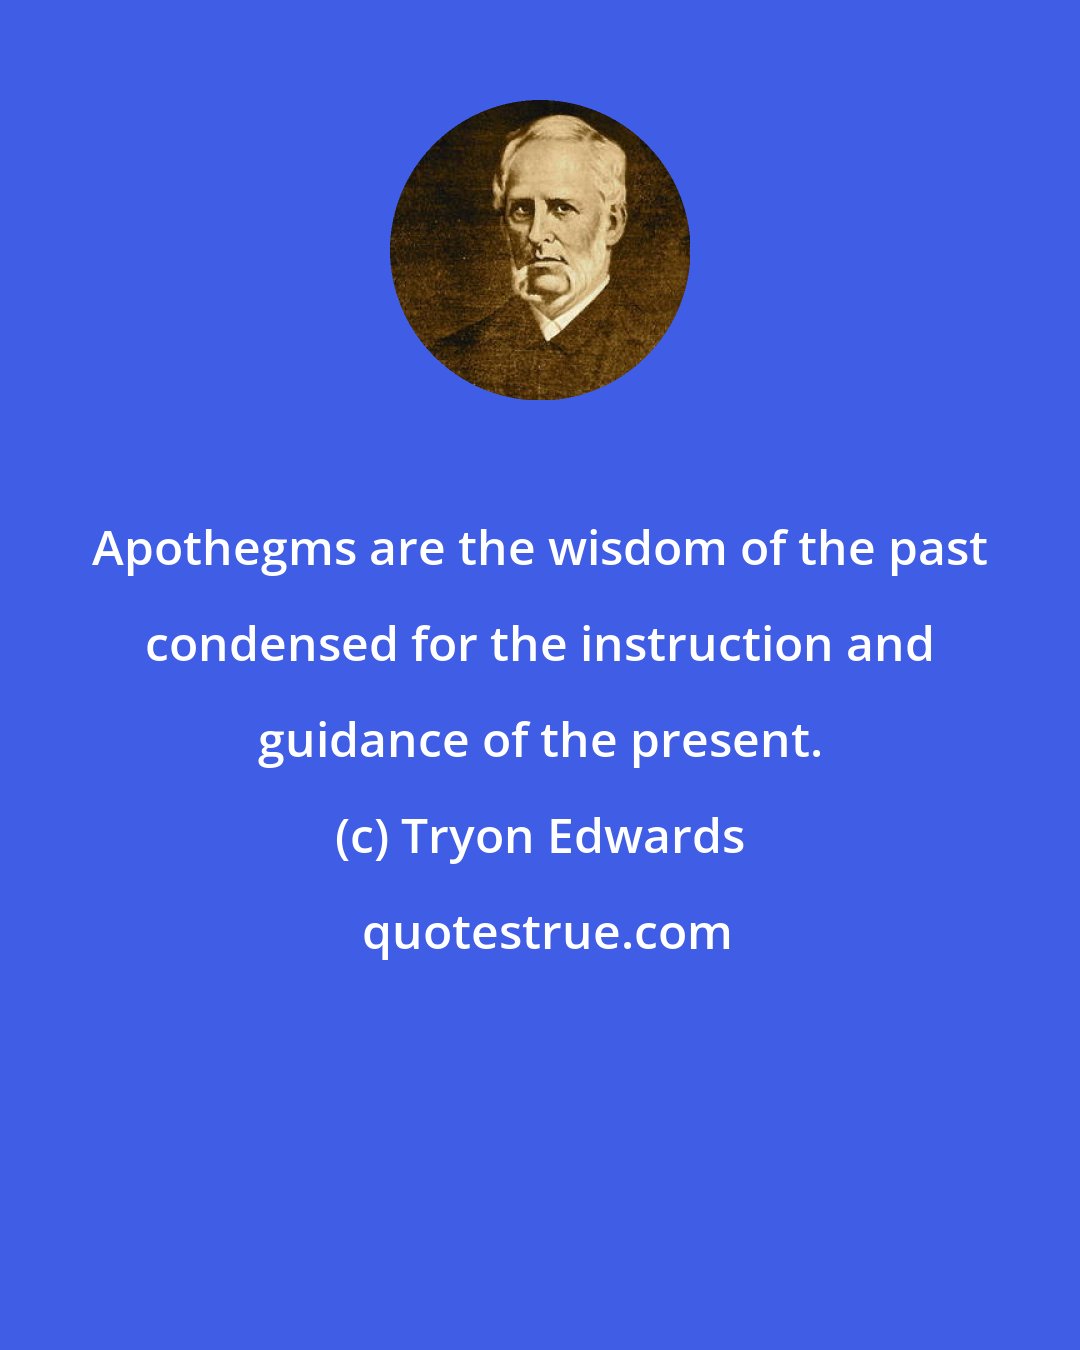 Tryon Edwards: Apothegms are the wisdom of the past condensed for the instruction and guidance of the present.